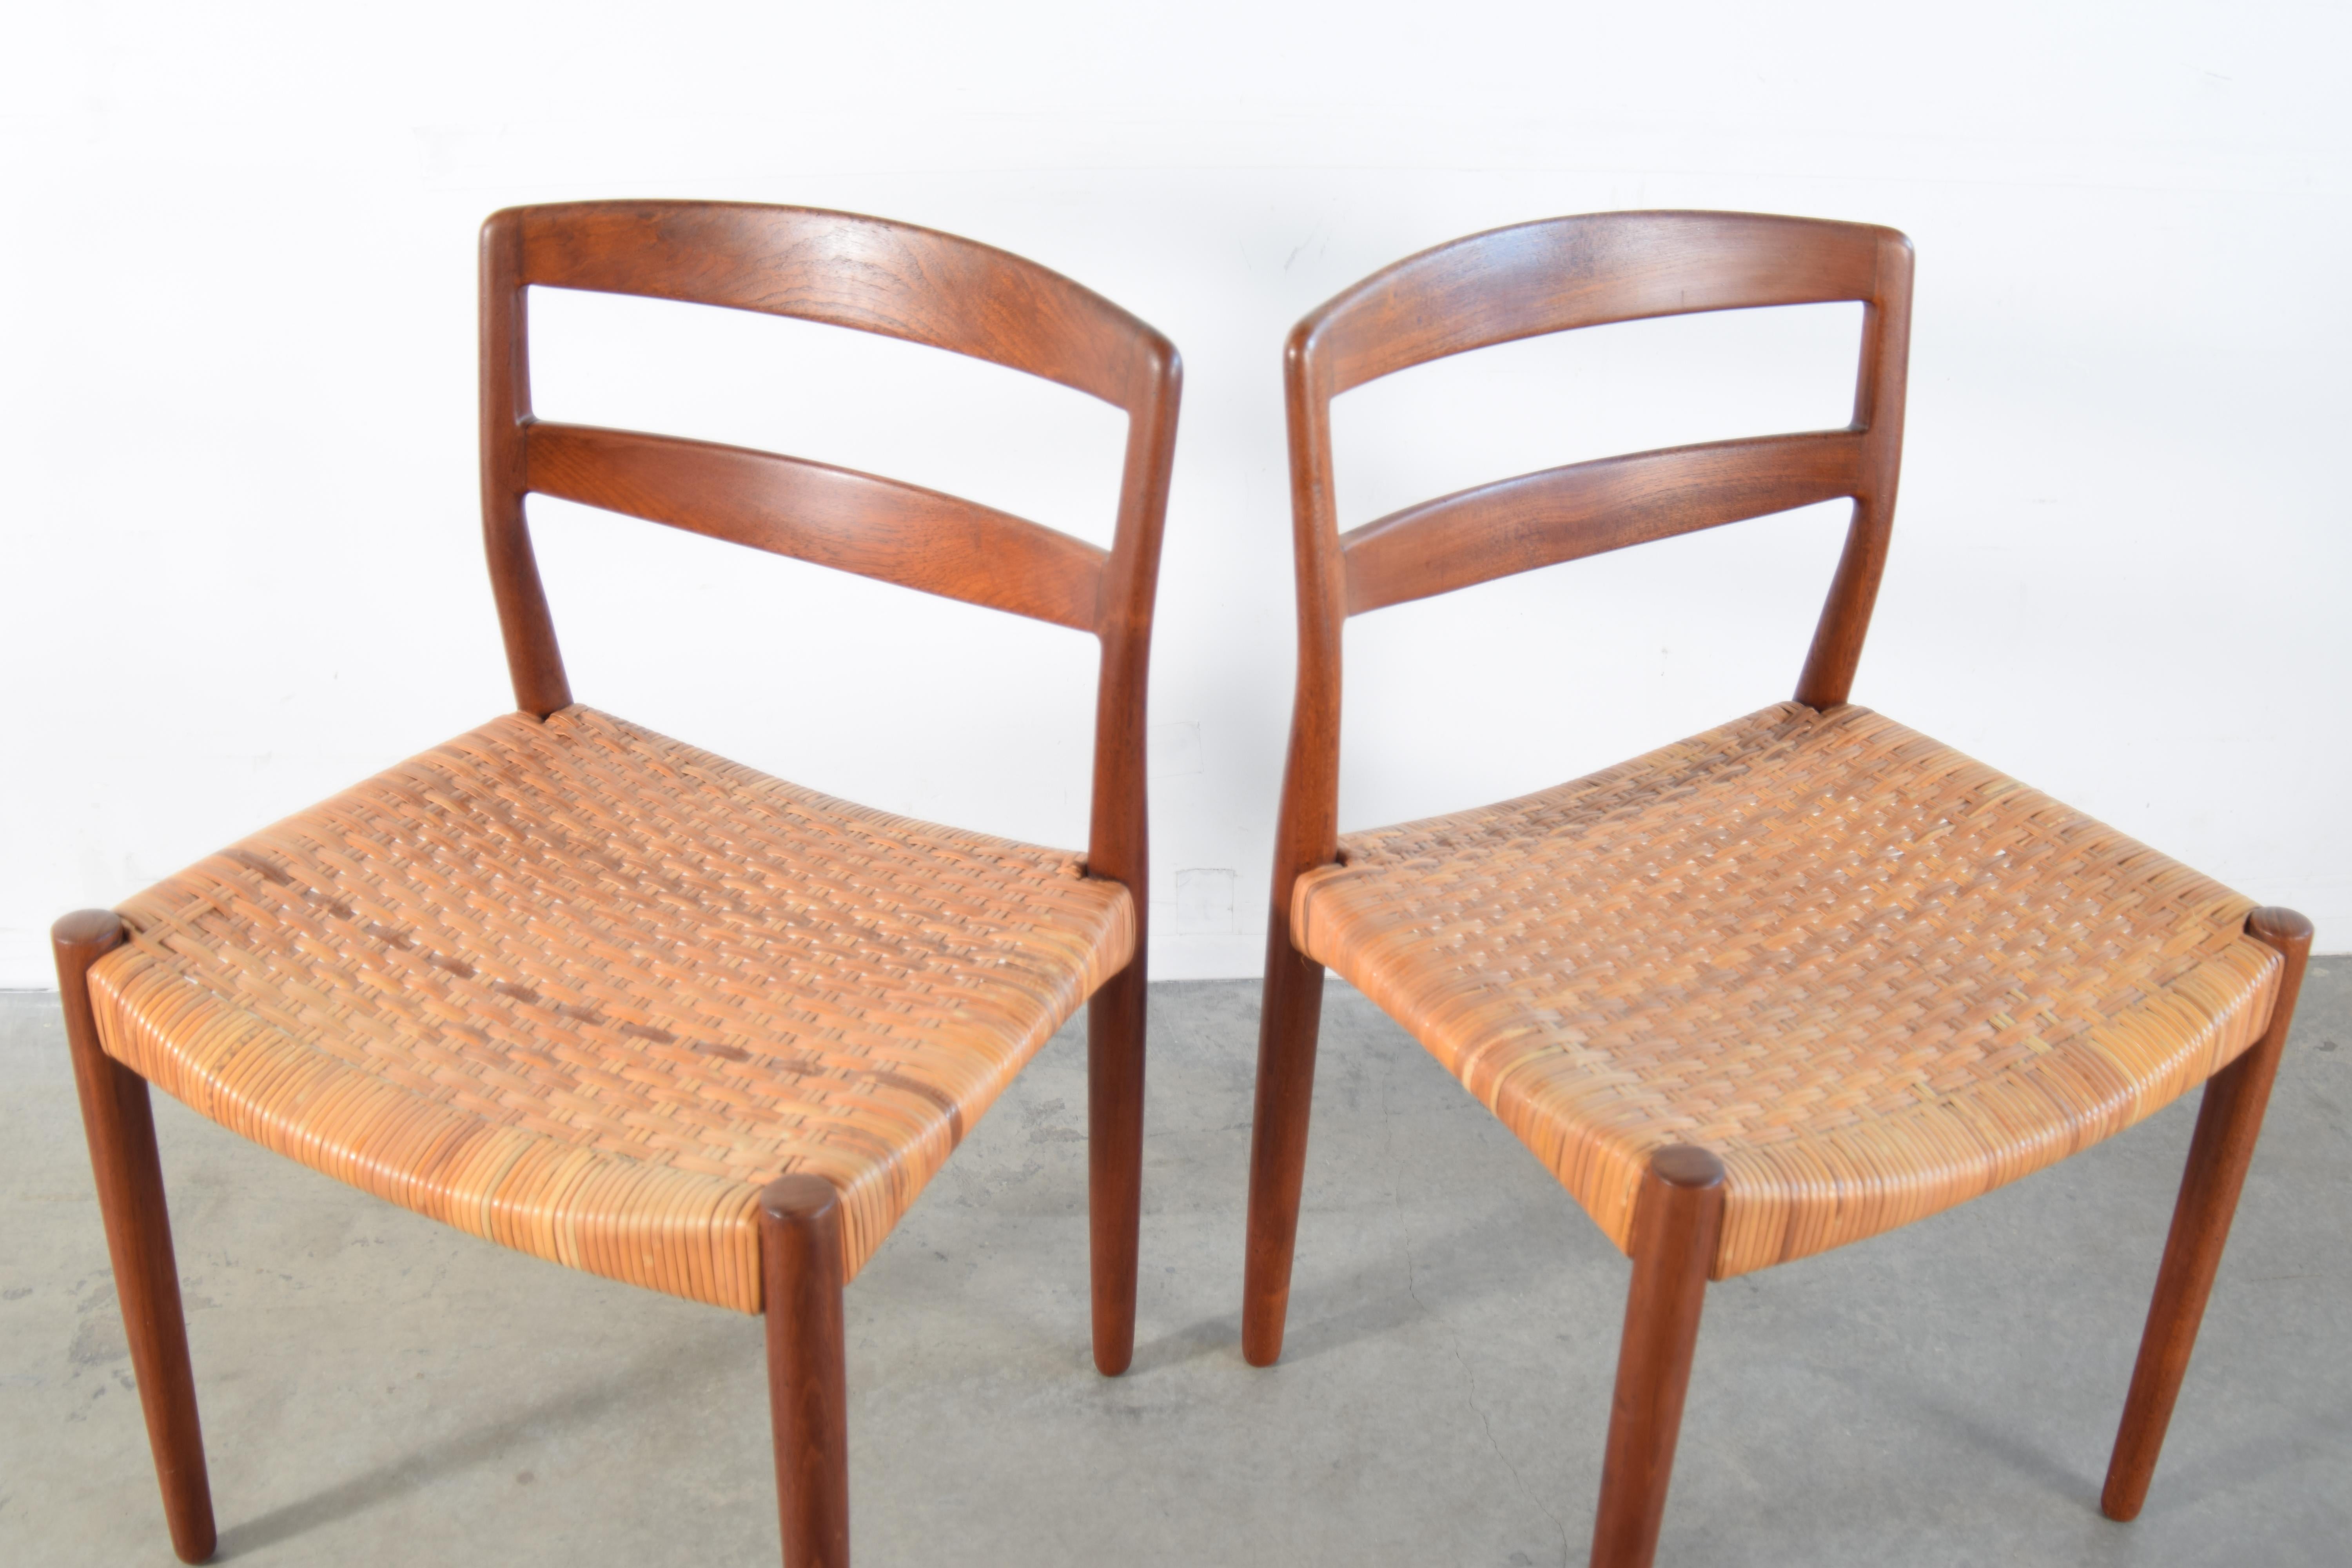 Pair of Ejner Larsen and Aksel Bender Madsen Teak and Cane Chairs For Sale 1